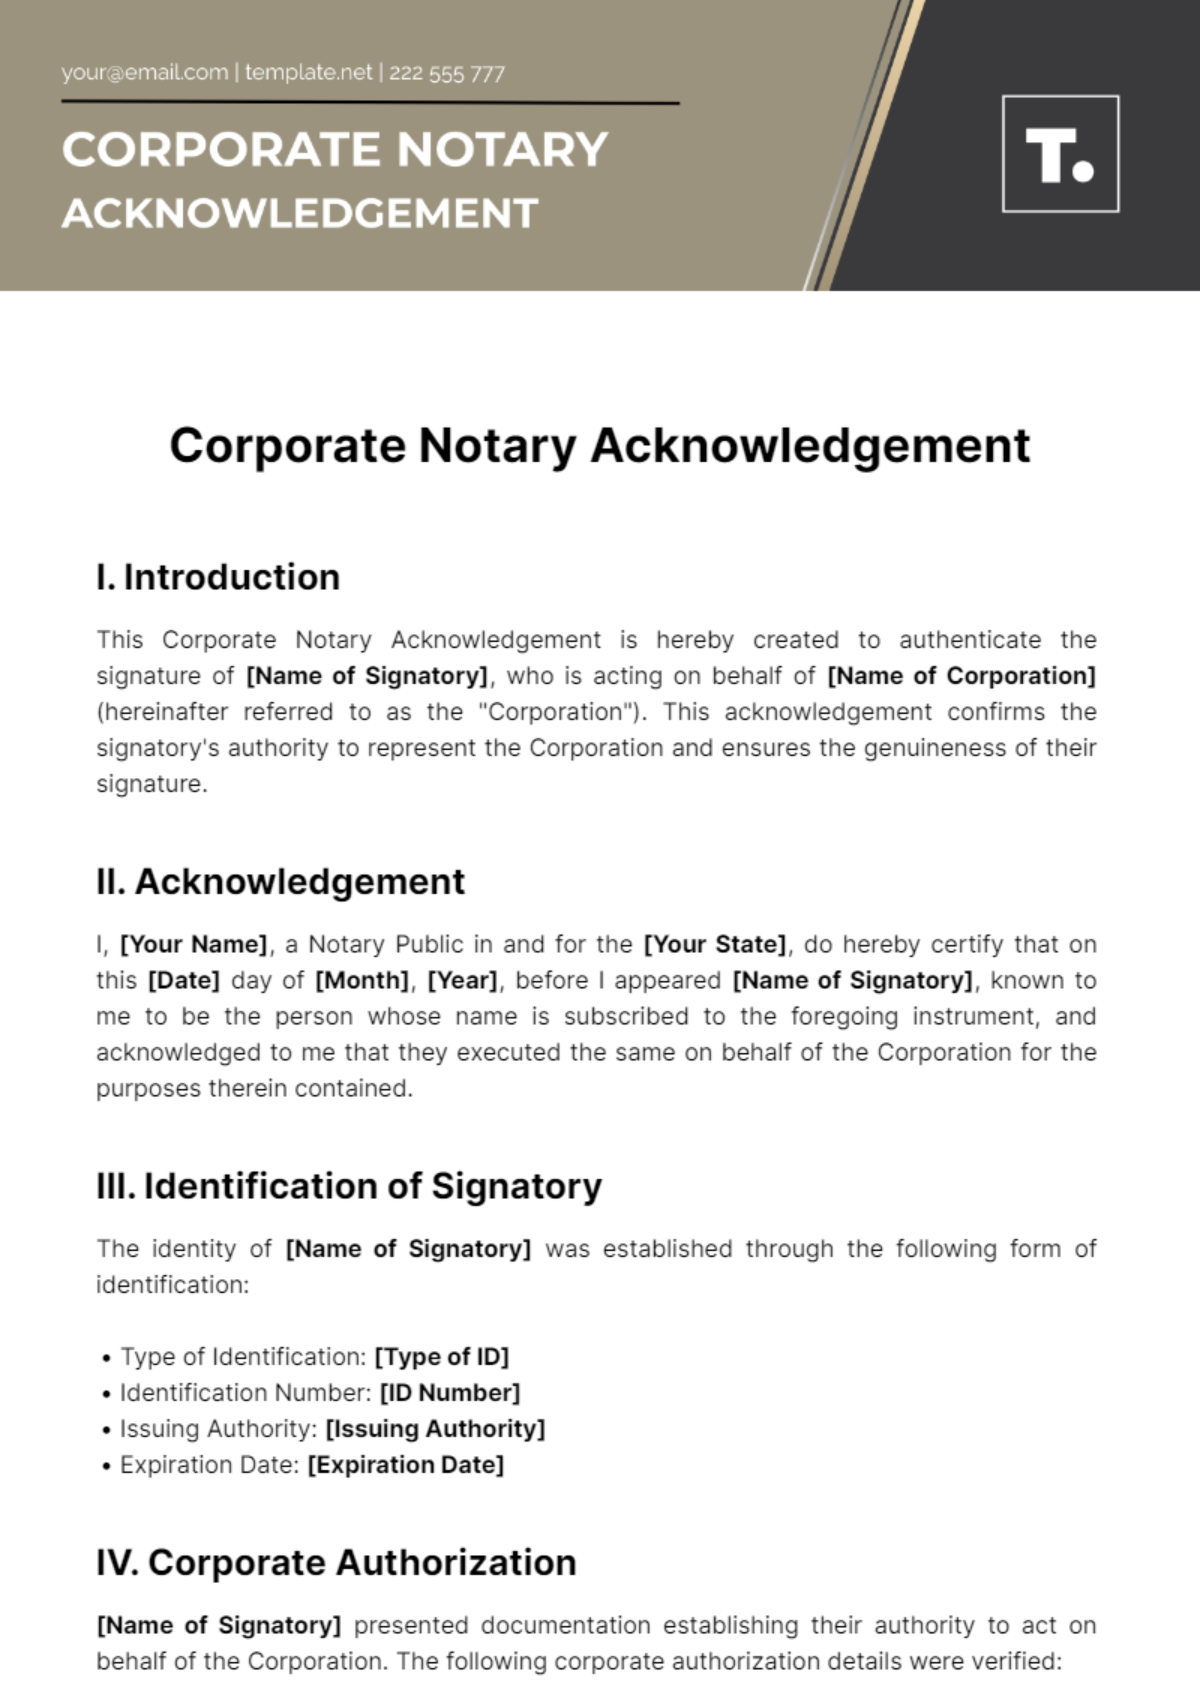 Corporate Notary Acknowledgement Template